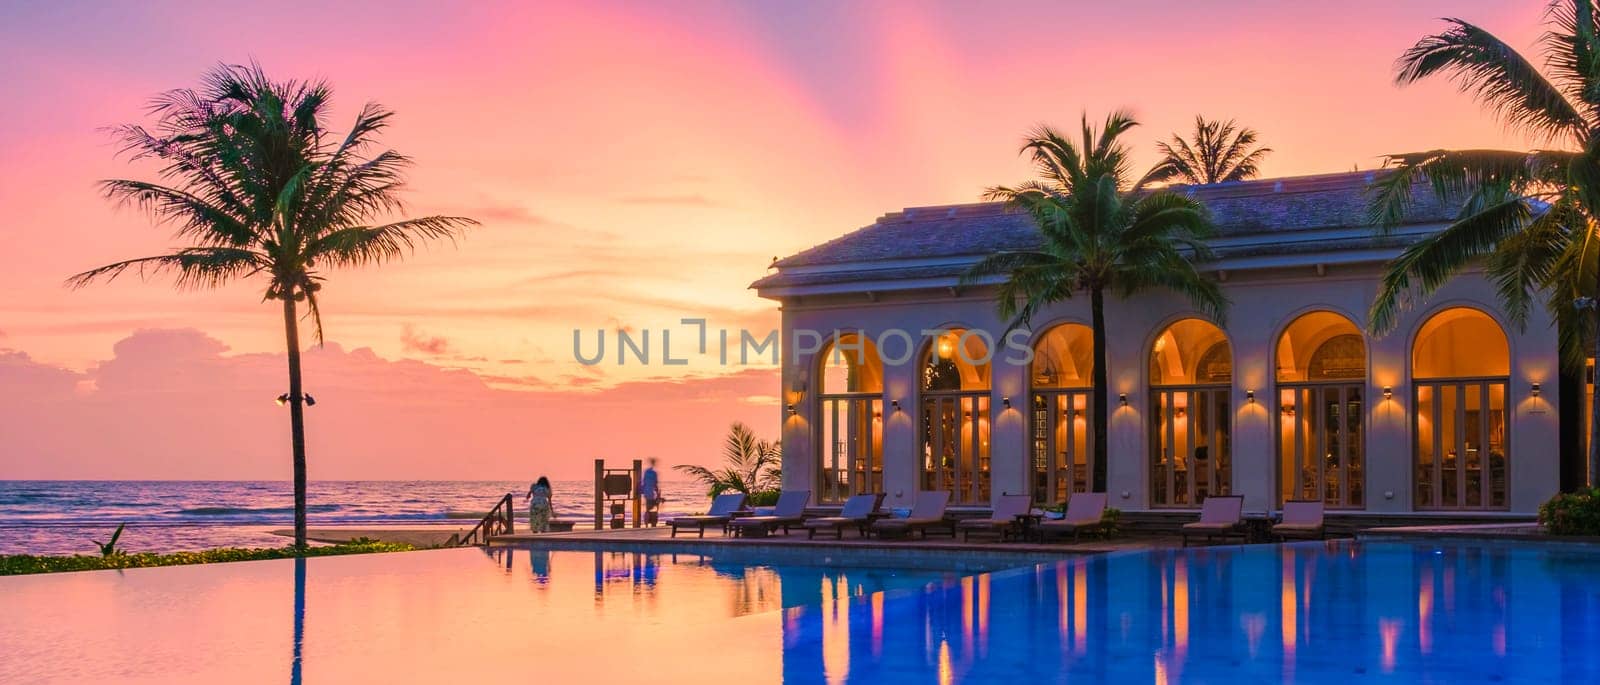 sunset at a swimming pool during a vacation on a tropical island, sunset tropical beach by fokkebok